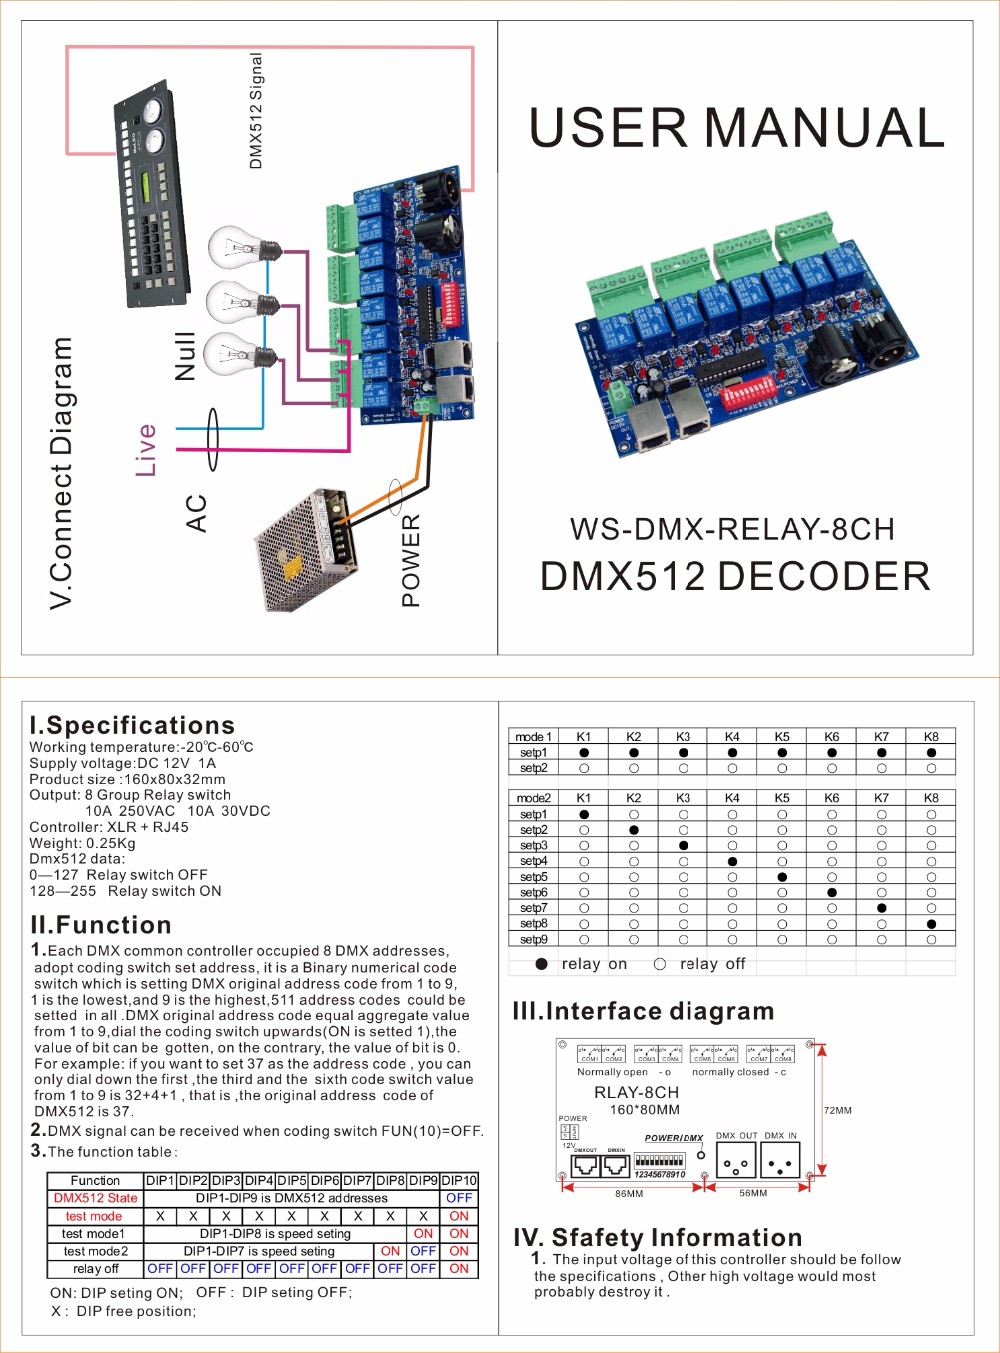 New_DMX_Controllers_WS_DMX_RELAY_8CH_1